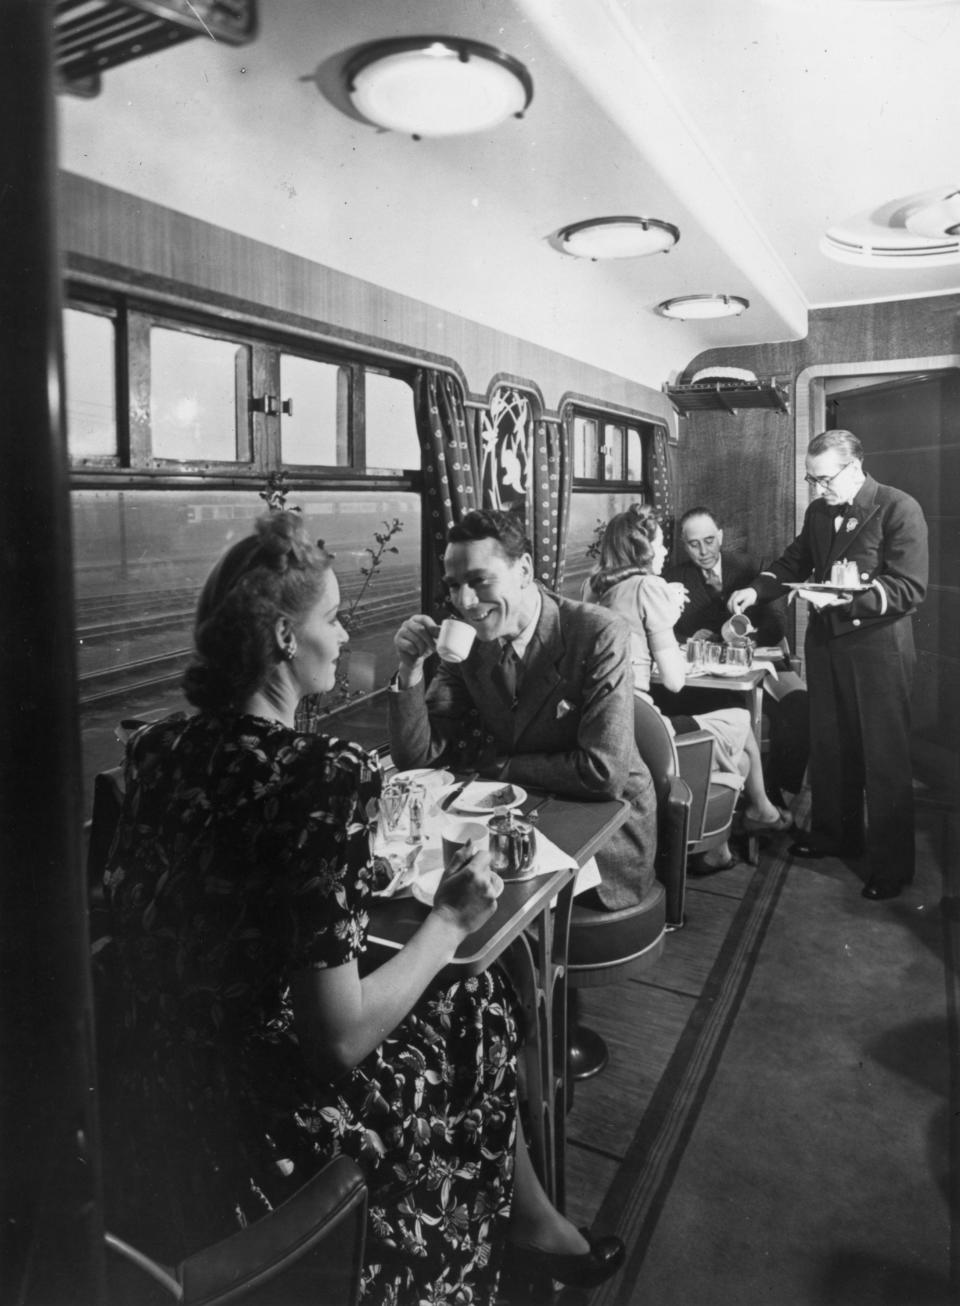 Diners in the restaurant car on a Great Western Railway oil-fired locomotive in 1946.